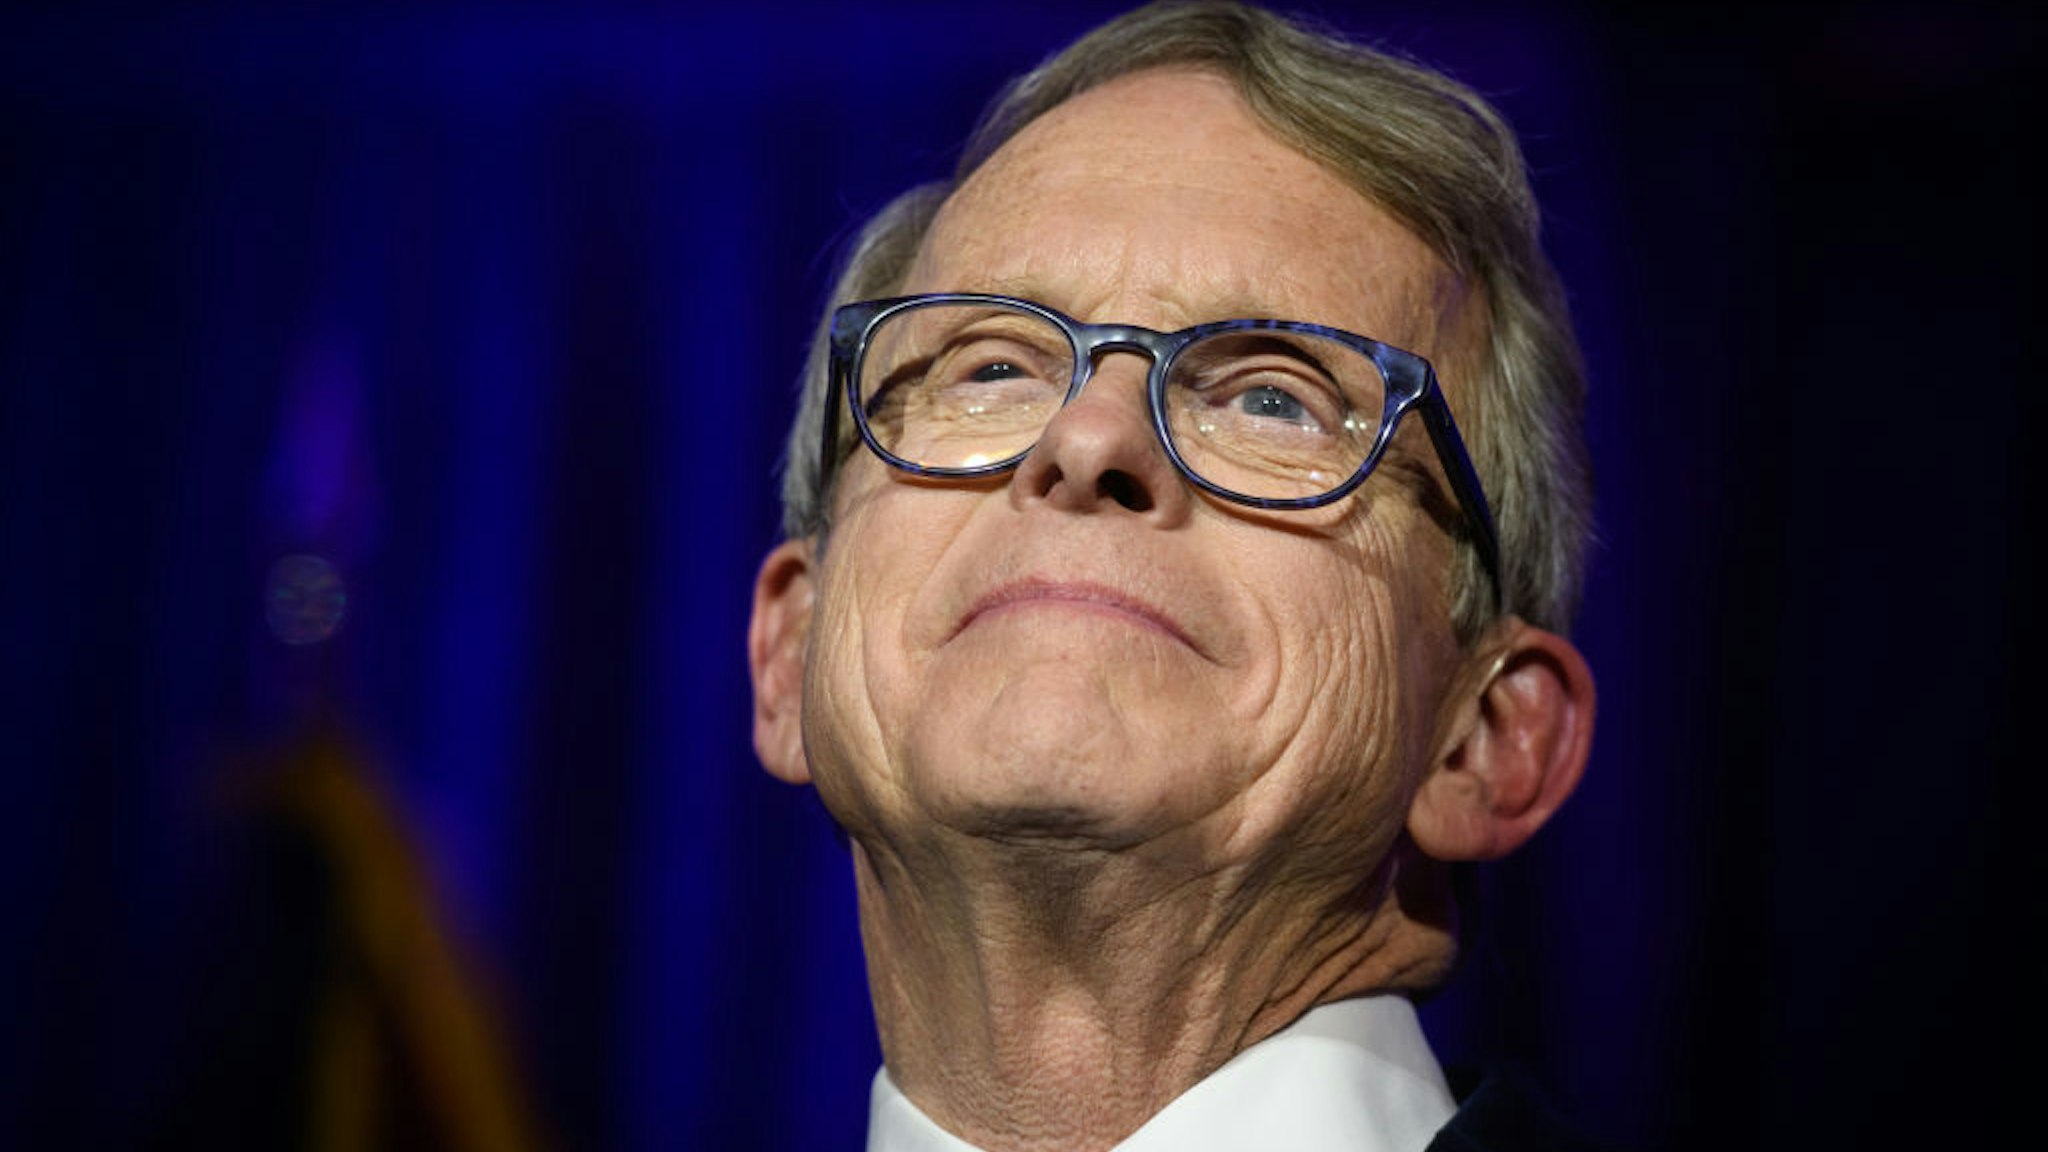 COLUMBUS, OH - NOVEMBER 06: Republican Gubernatorial-elect Ohio Attorney General Mike DeWine gives his victory speech after winning the Ohio gubernatorial race at the Ohio Republican Party's election night party at the Sheraton Capitol Square on November 6, 2018 in Columbus, Ohio. DeWine defeated Democratic Gubernatorial Candidate Richard Cordray to win the Ohio governorship.